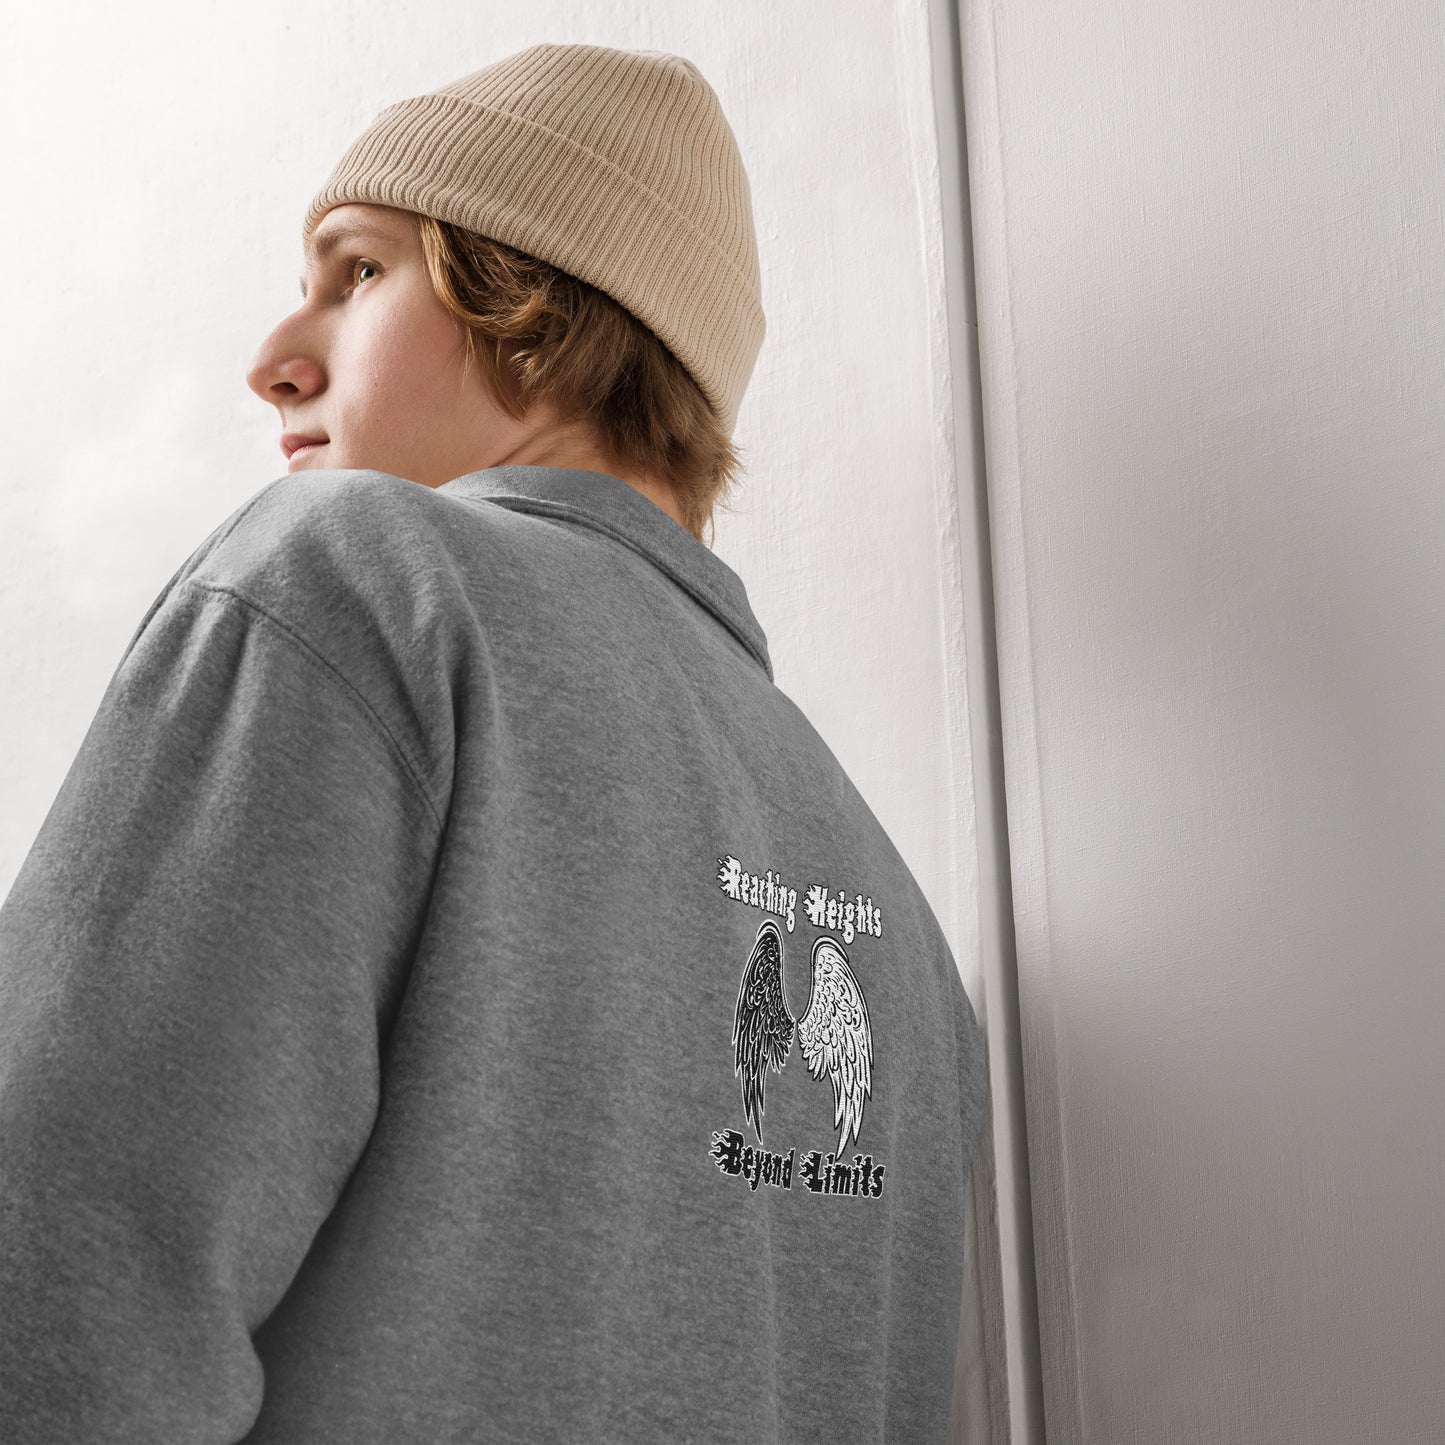 Niccie's Unleash Potential Reaching Heights' Unisex Fleece Pullover Elevate Comfort & Style